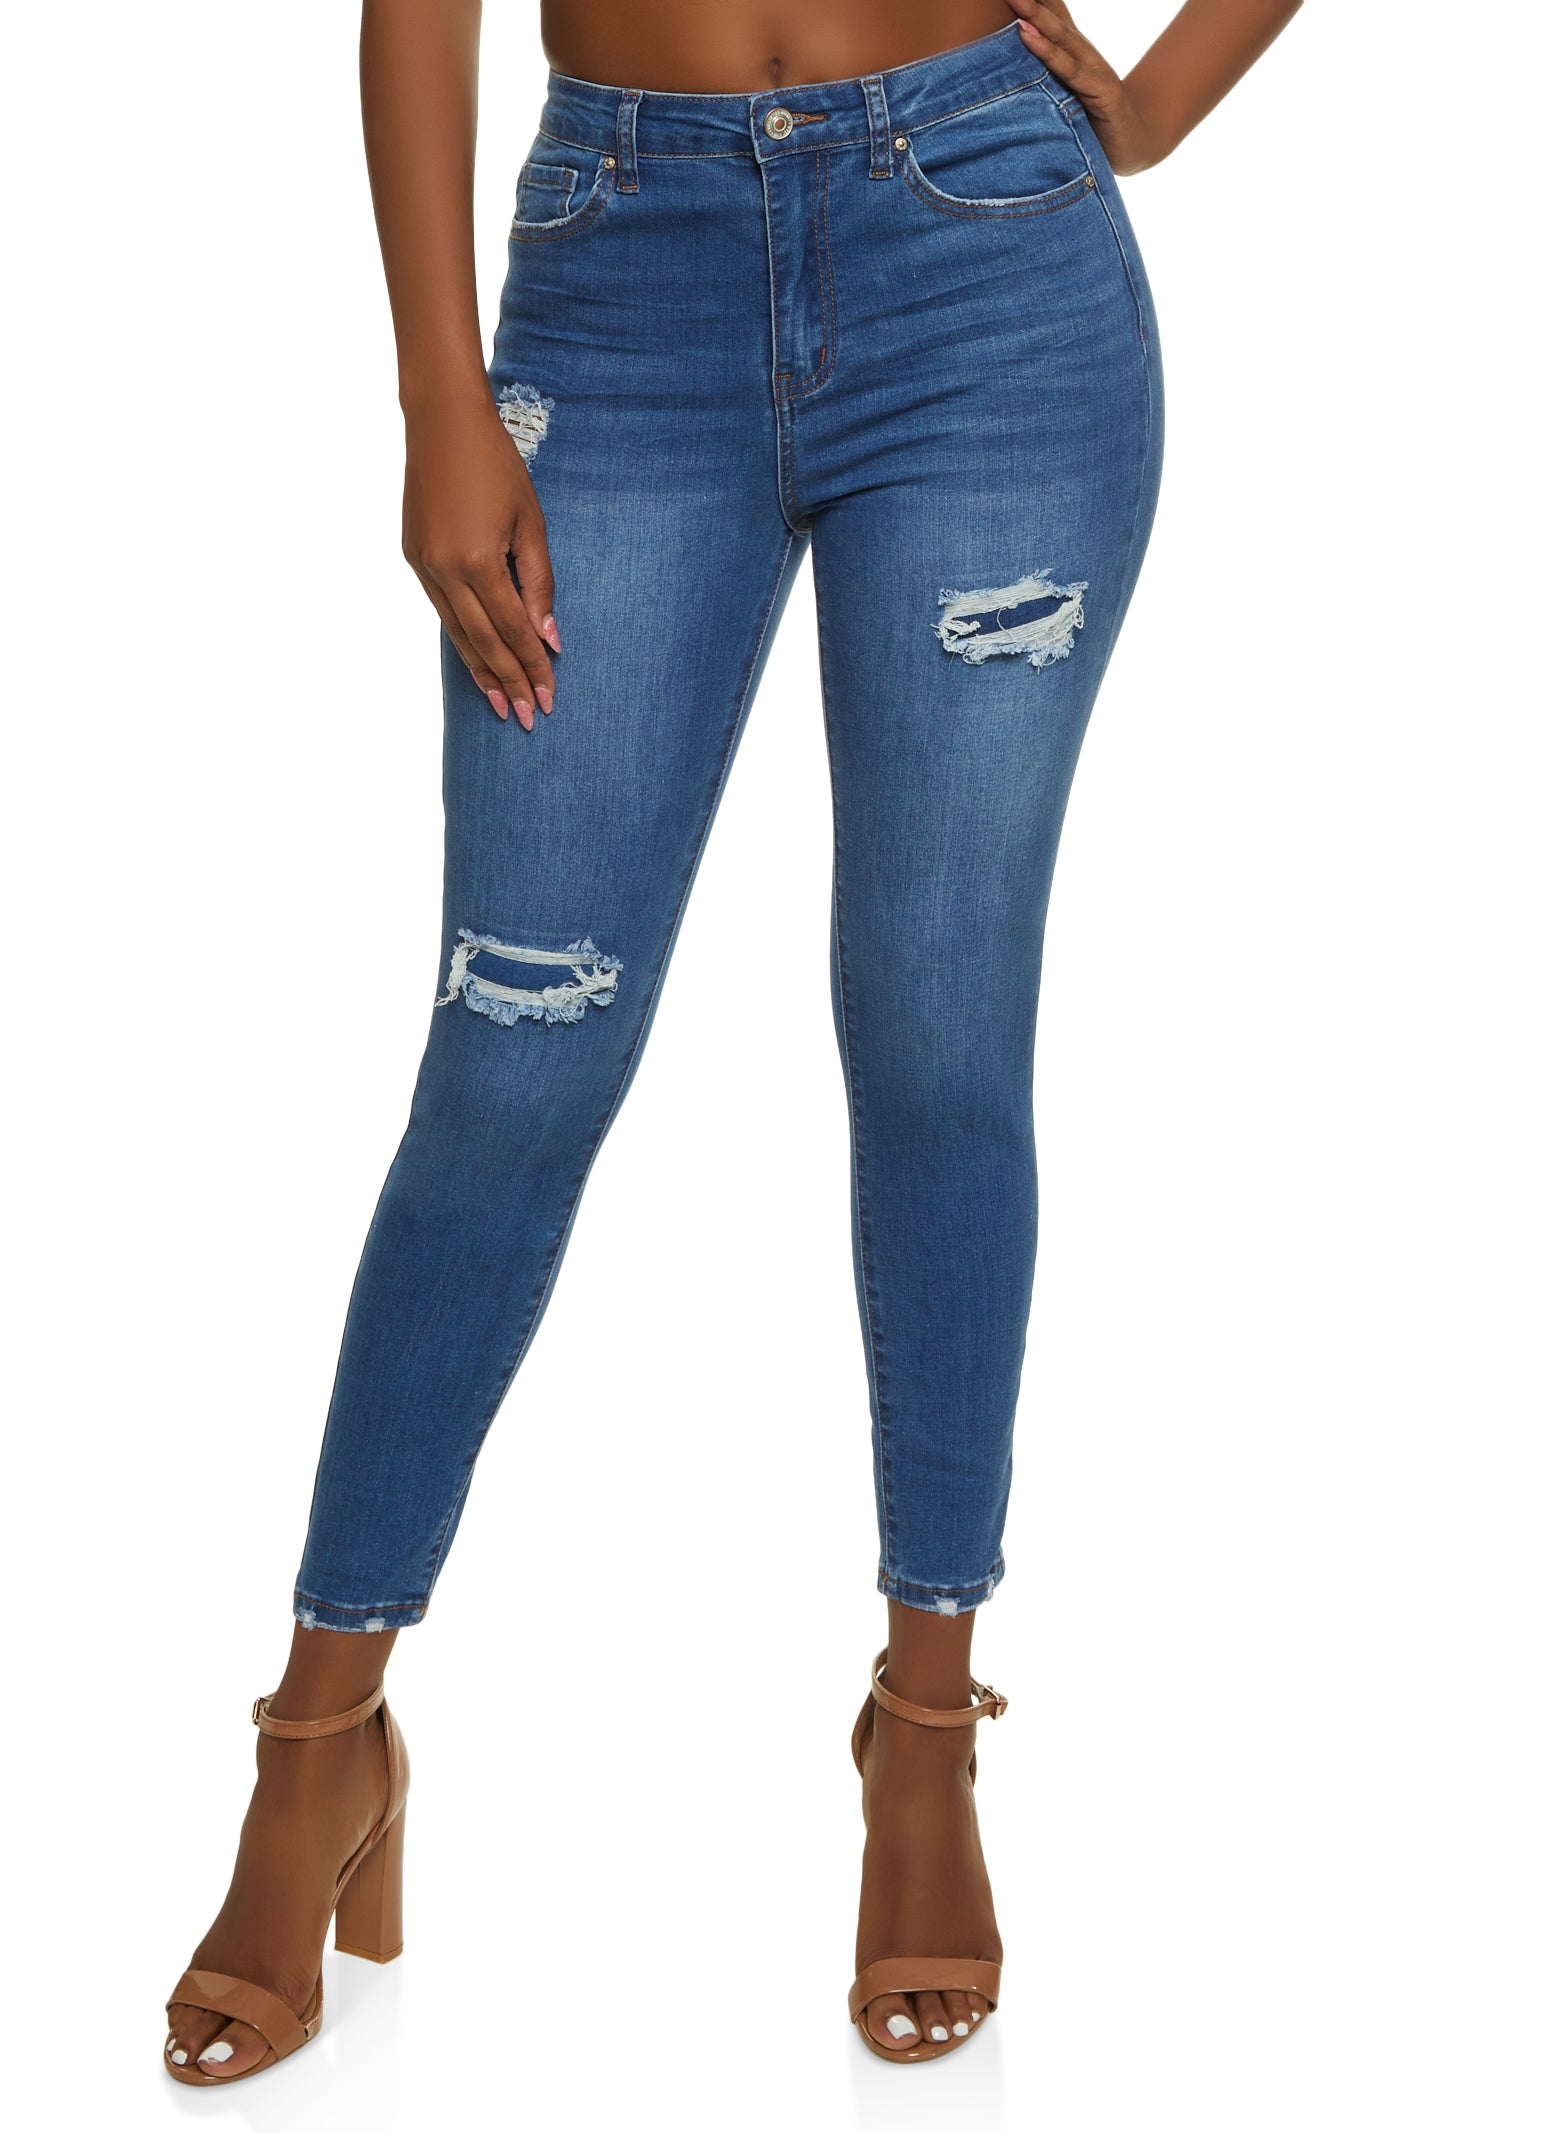 WAX Patch and Repair High Rise Skinny Jeans